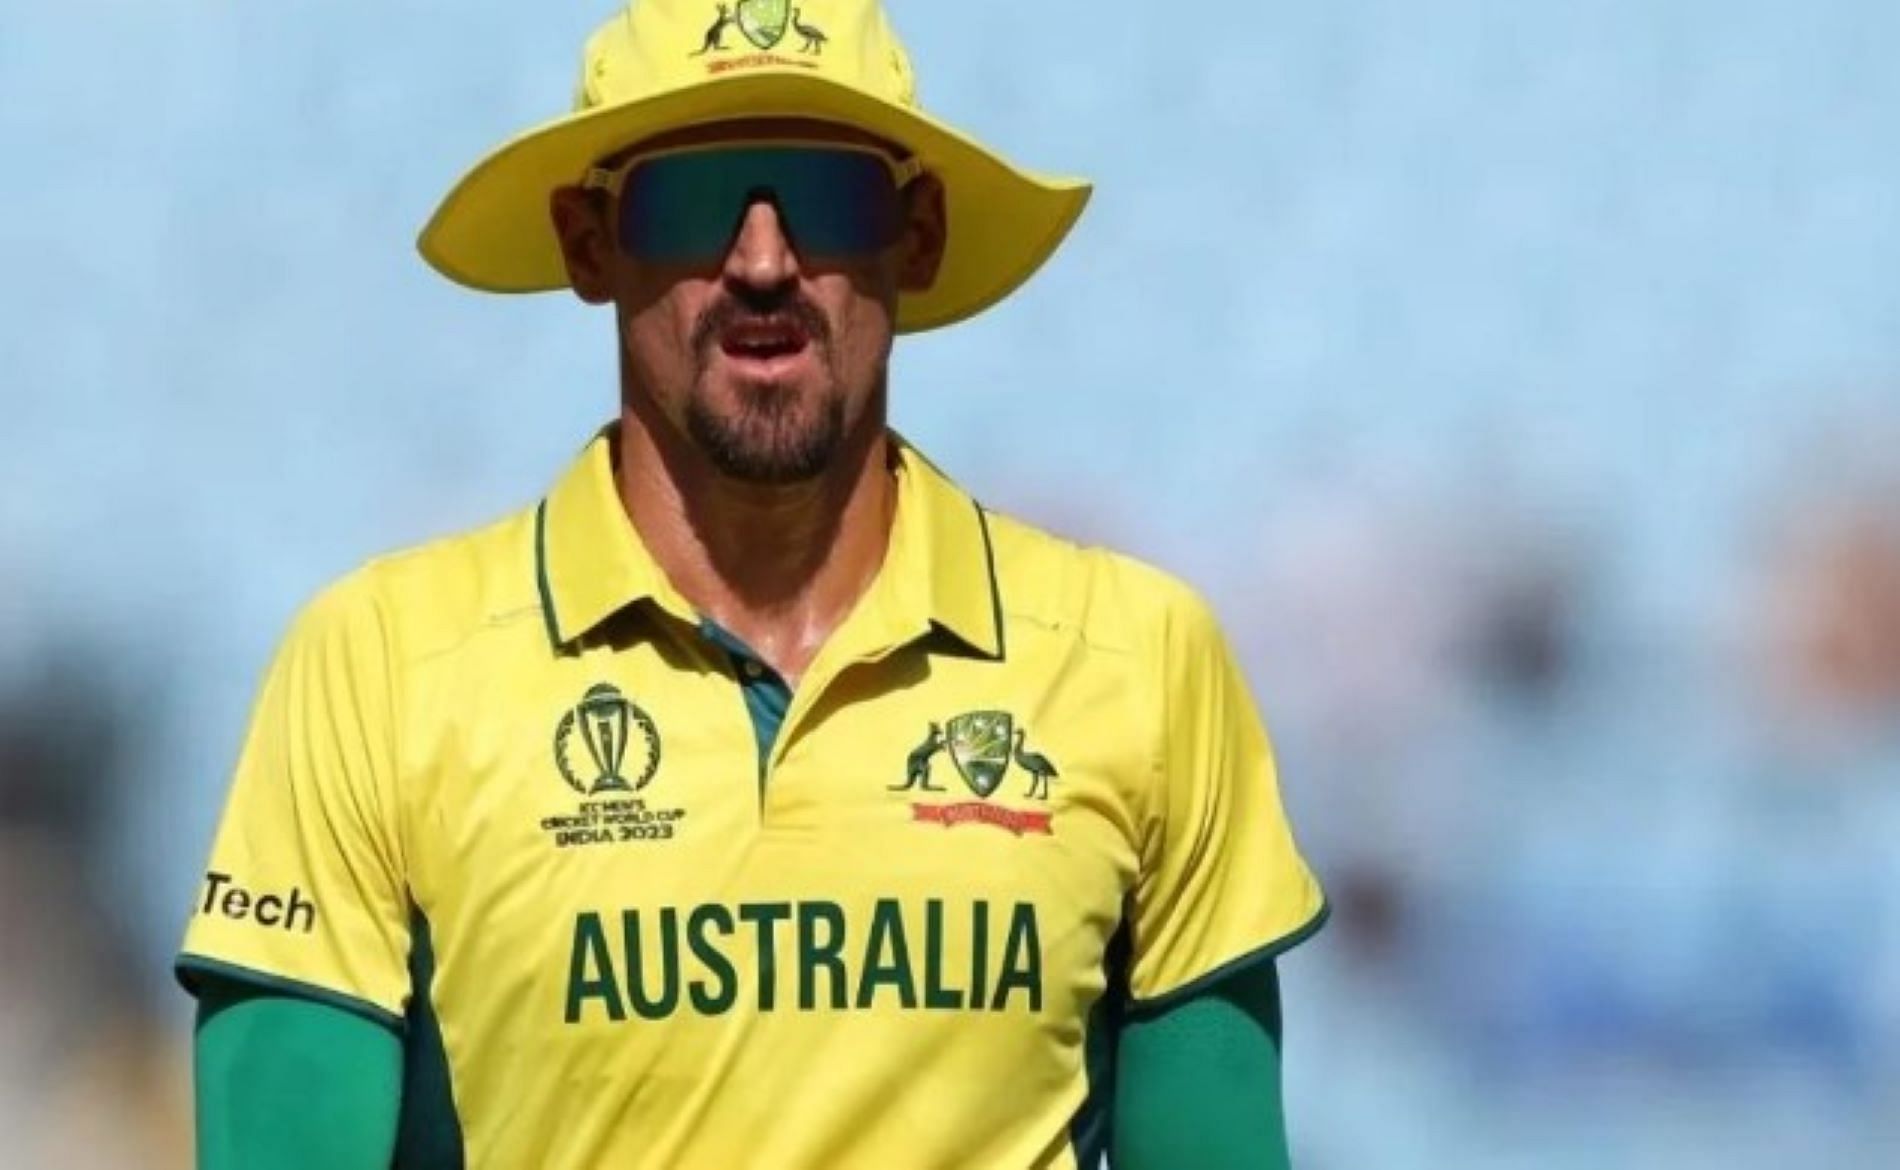 Australia will hope for Mitchell Starc to return to form in the semi-final.